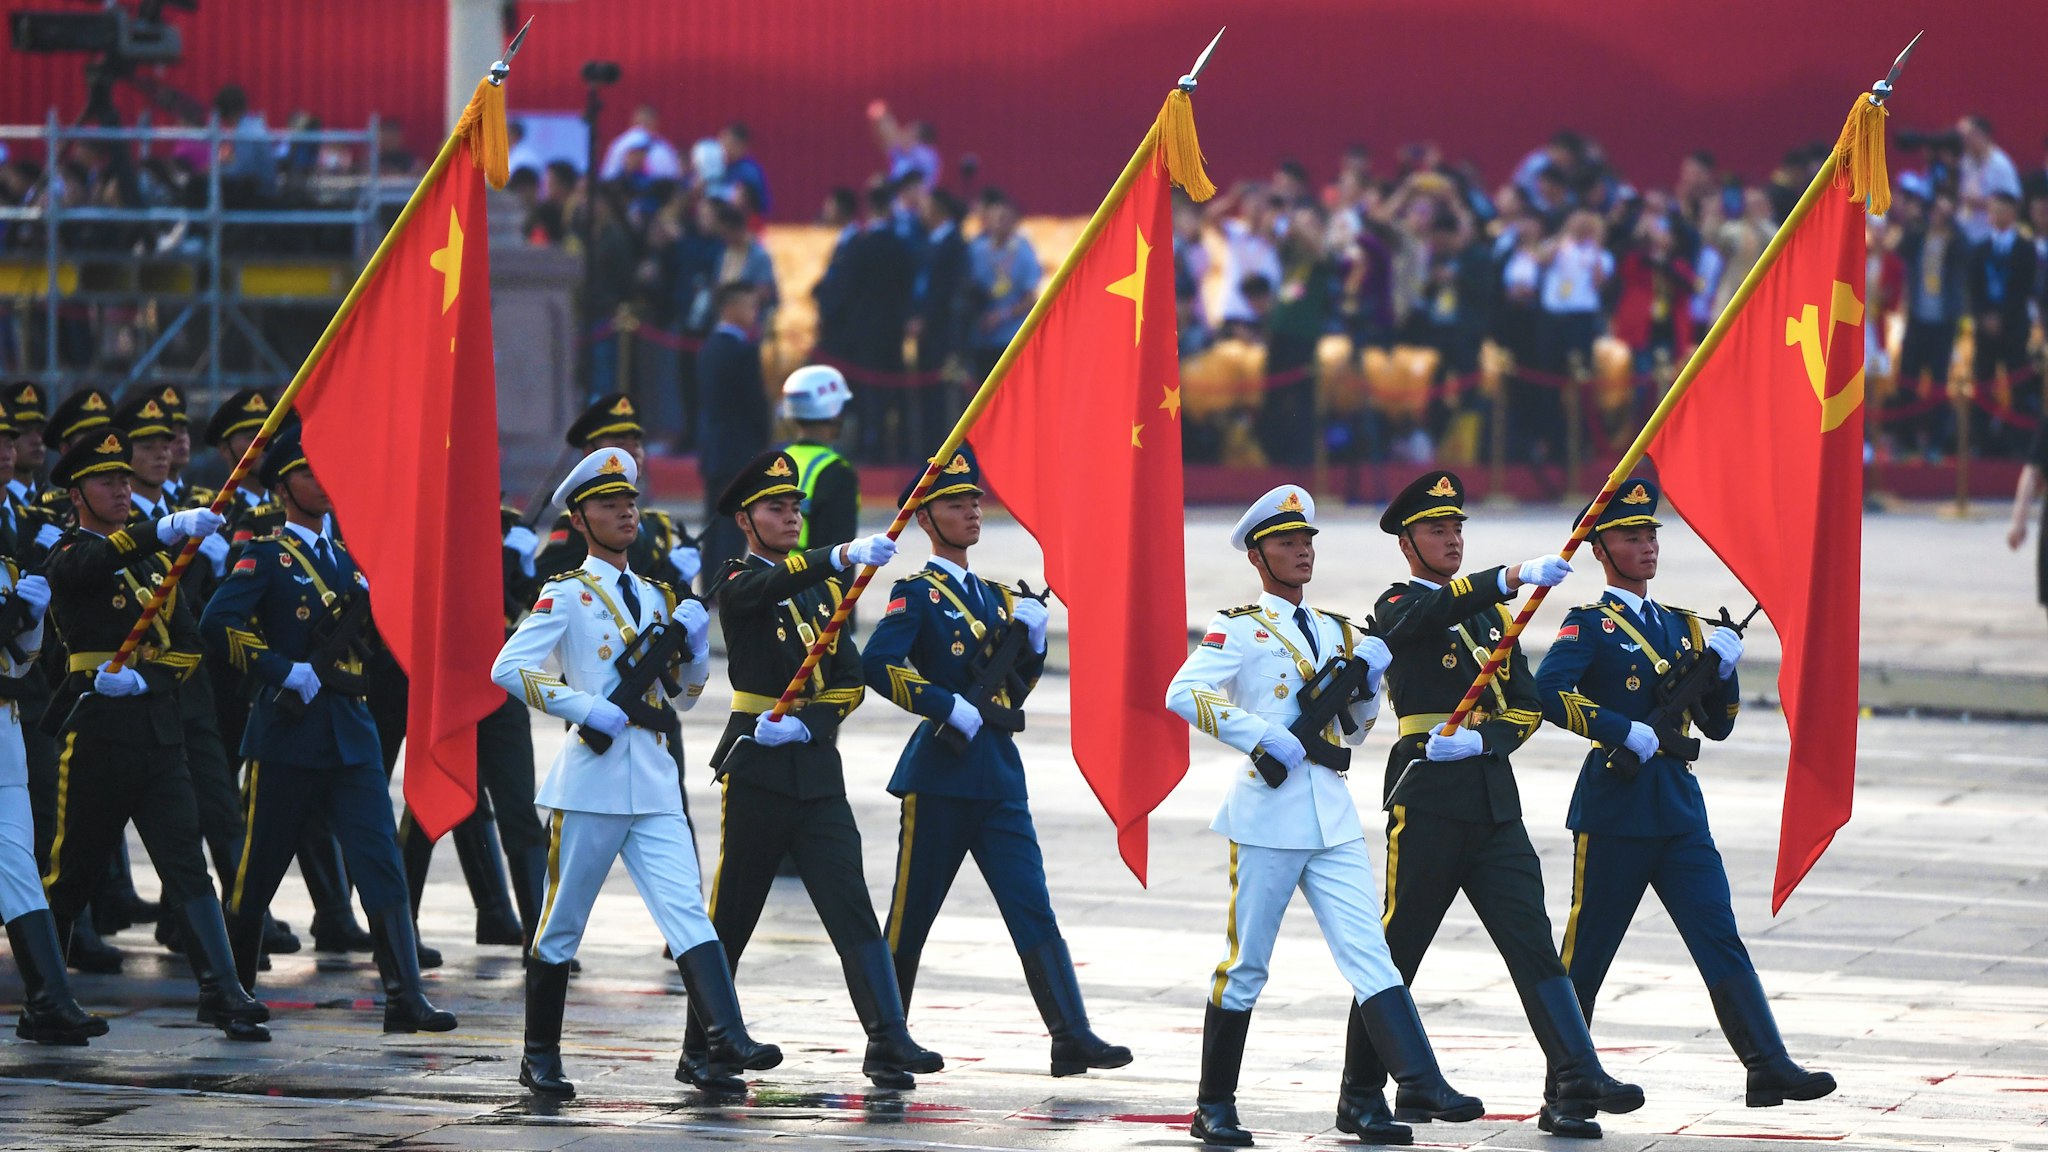 Chinese soldiers take part in a rehearsal ahead of a military parade in Tiananmen Square in Beijing on October 1, 2019, to mark the 70th anniversary of the founding of the Peoples Republic of China.